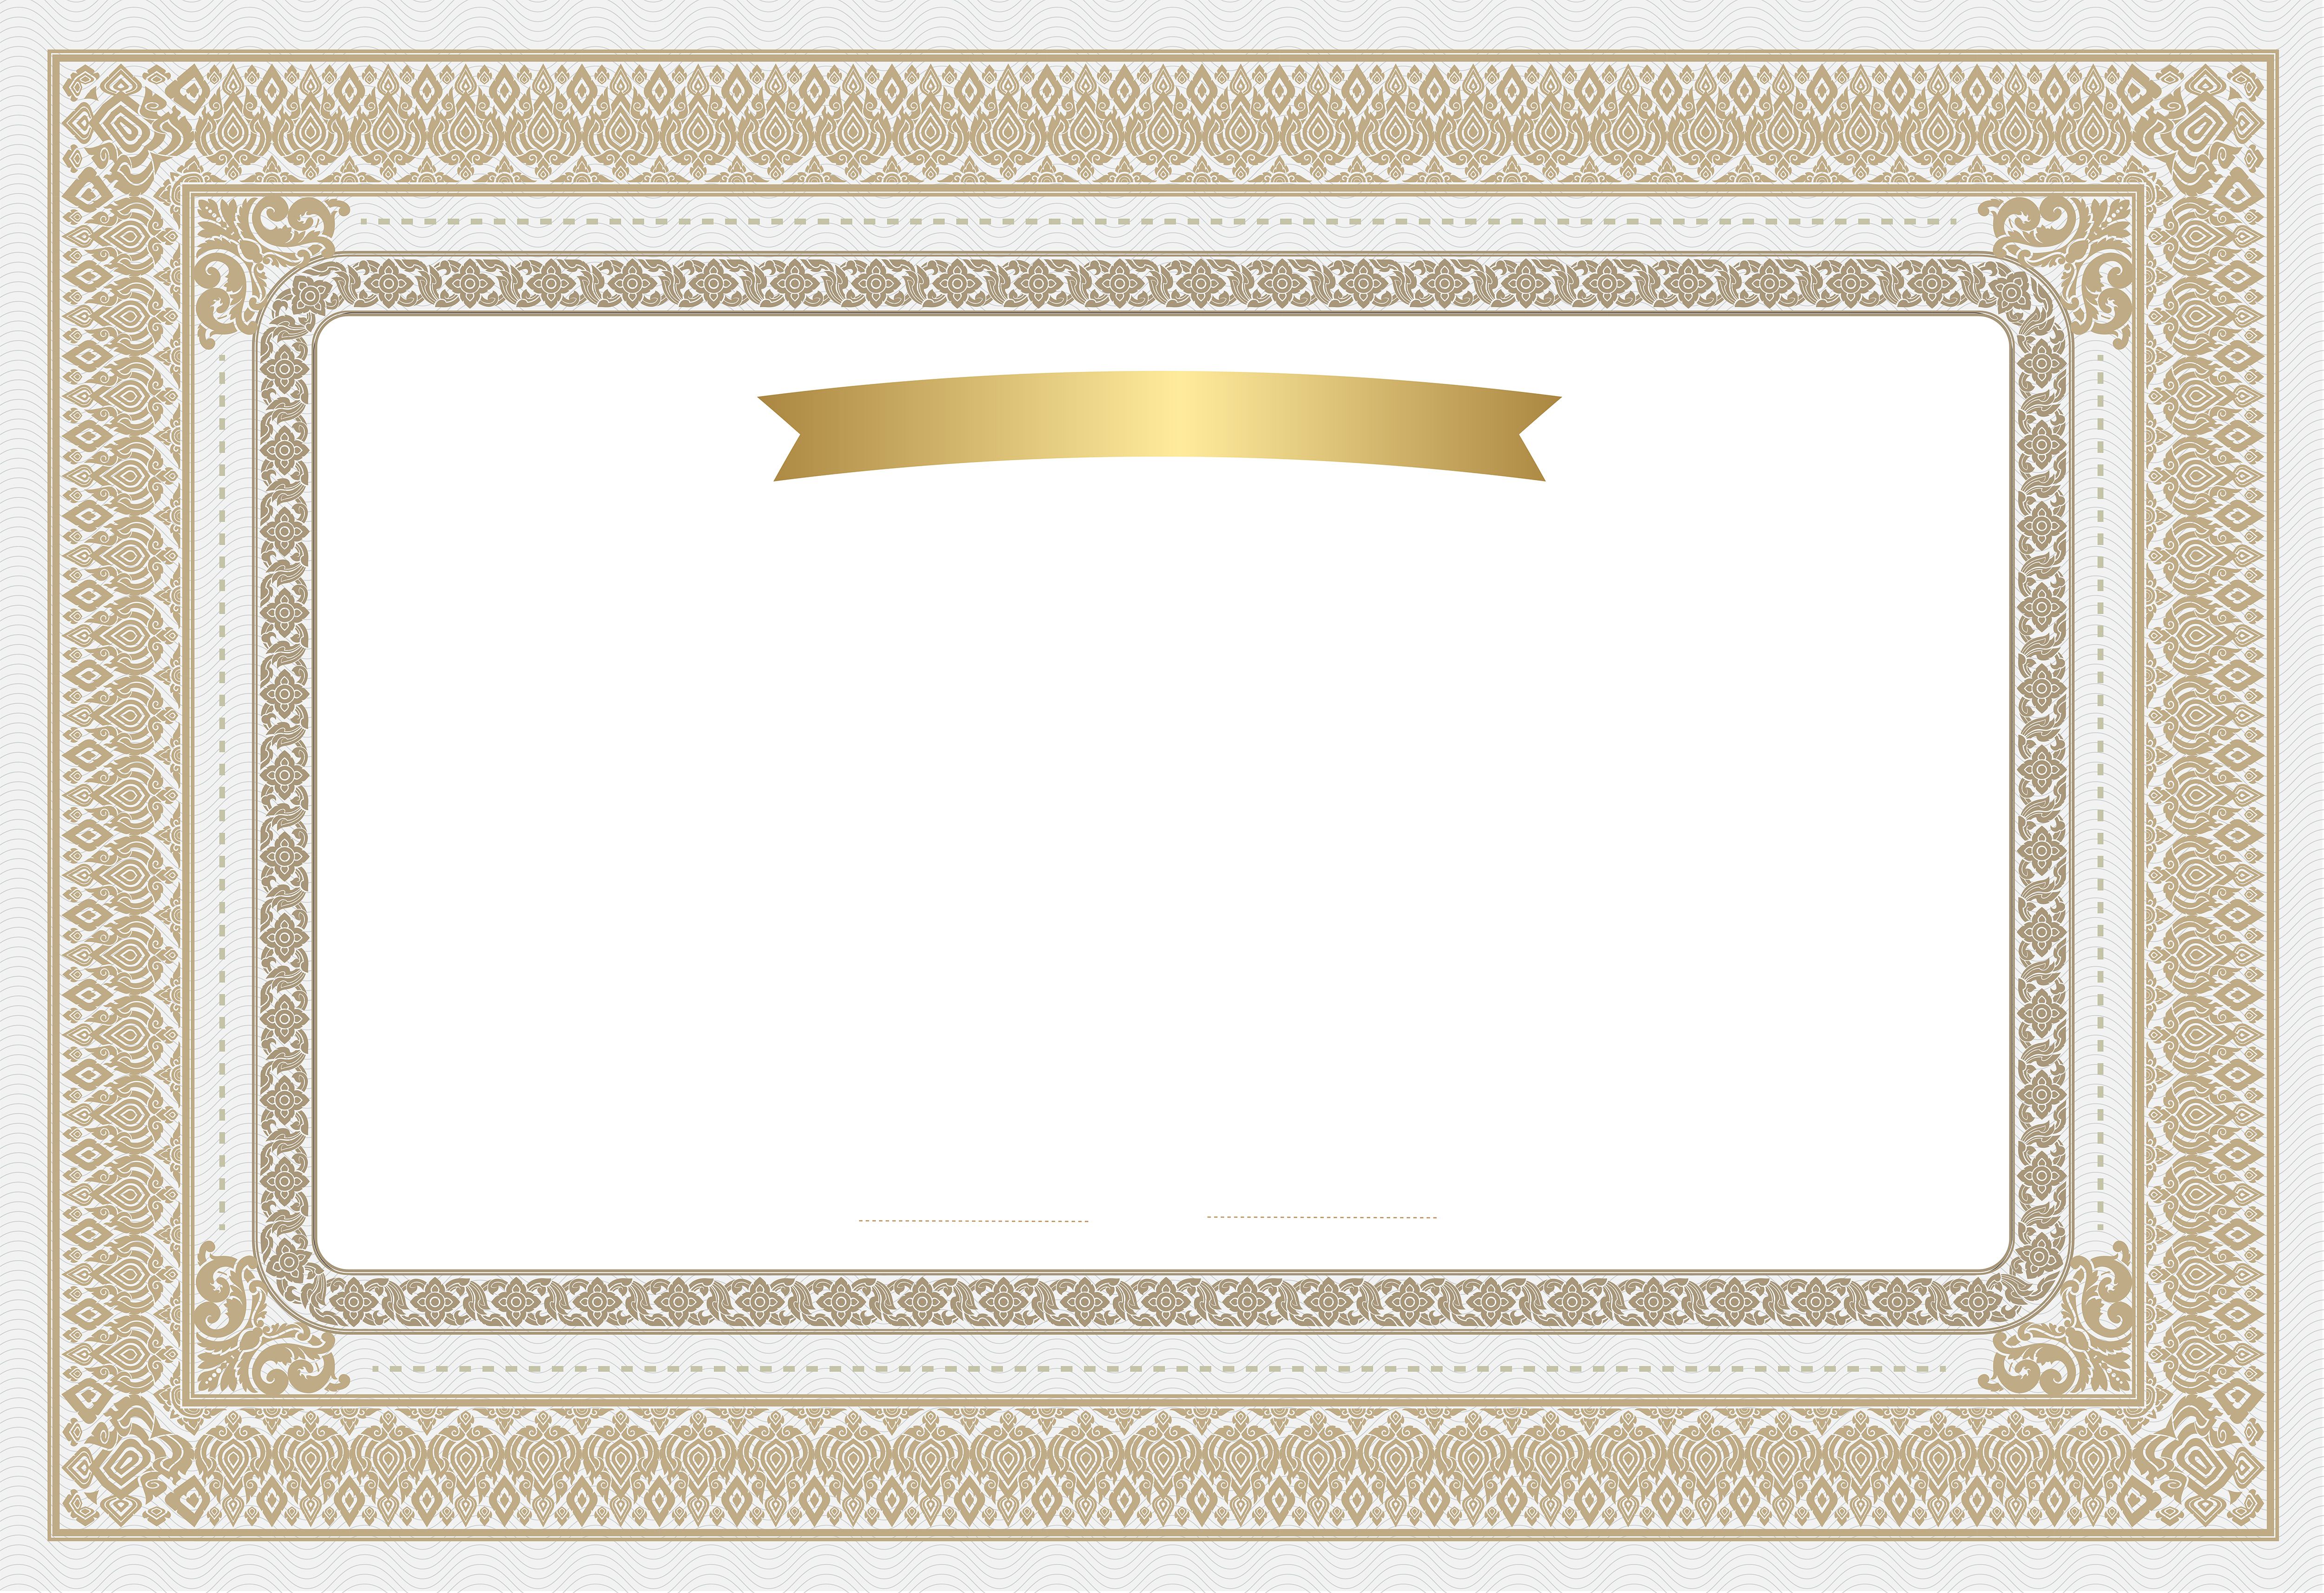 Empty Certificate Clip Art Image​-Quality Image and Transparent PNG Free Clipa. Frame border design, Certificate design, Art image